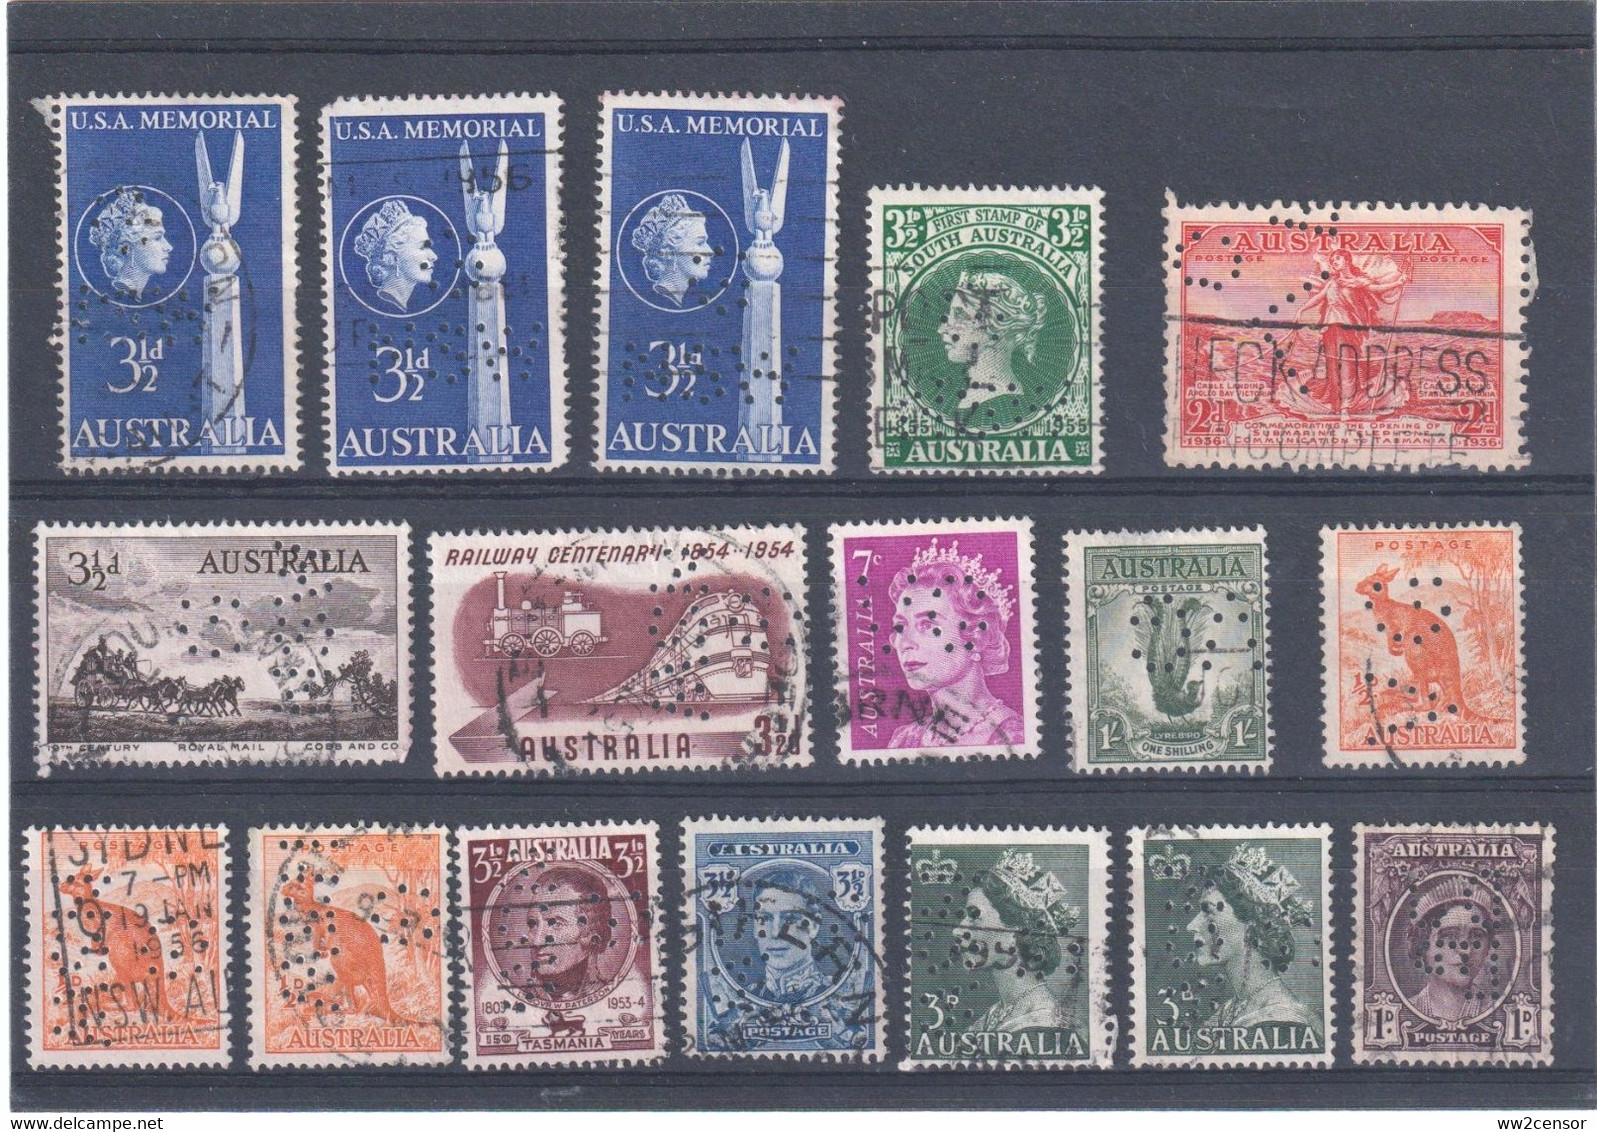 Australia 17 Perfin Stamps - Several G / NSW On Different Stamps - Perfins